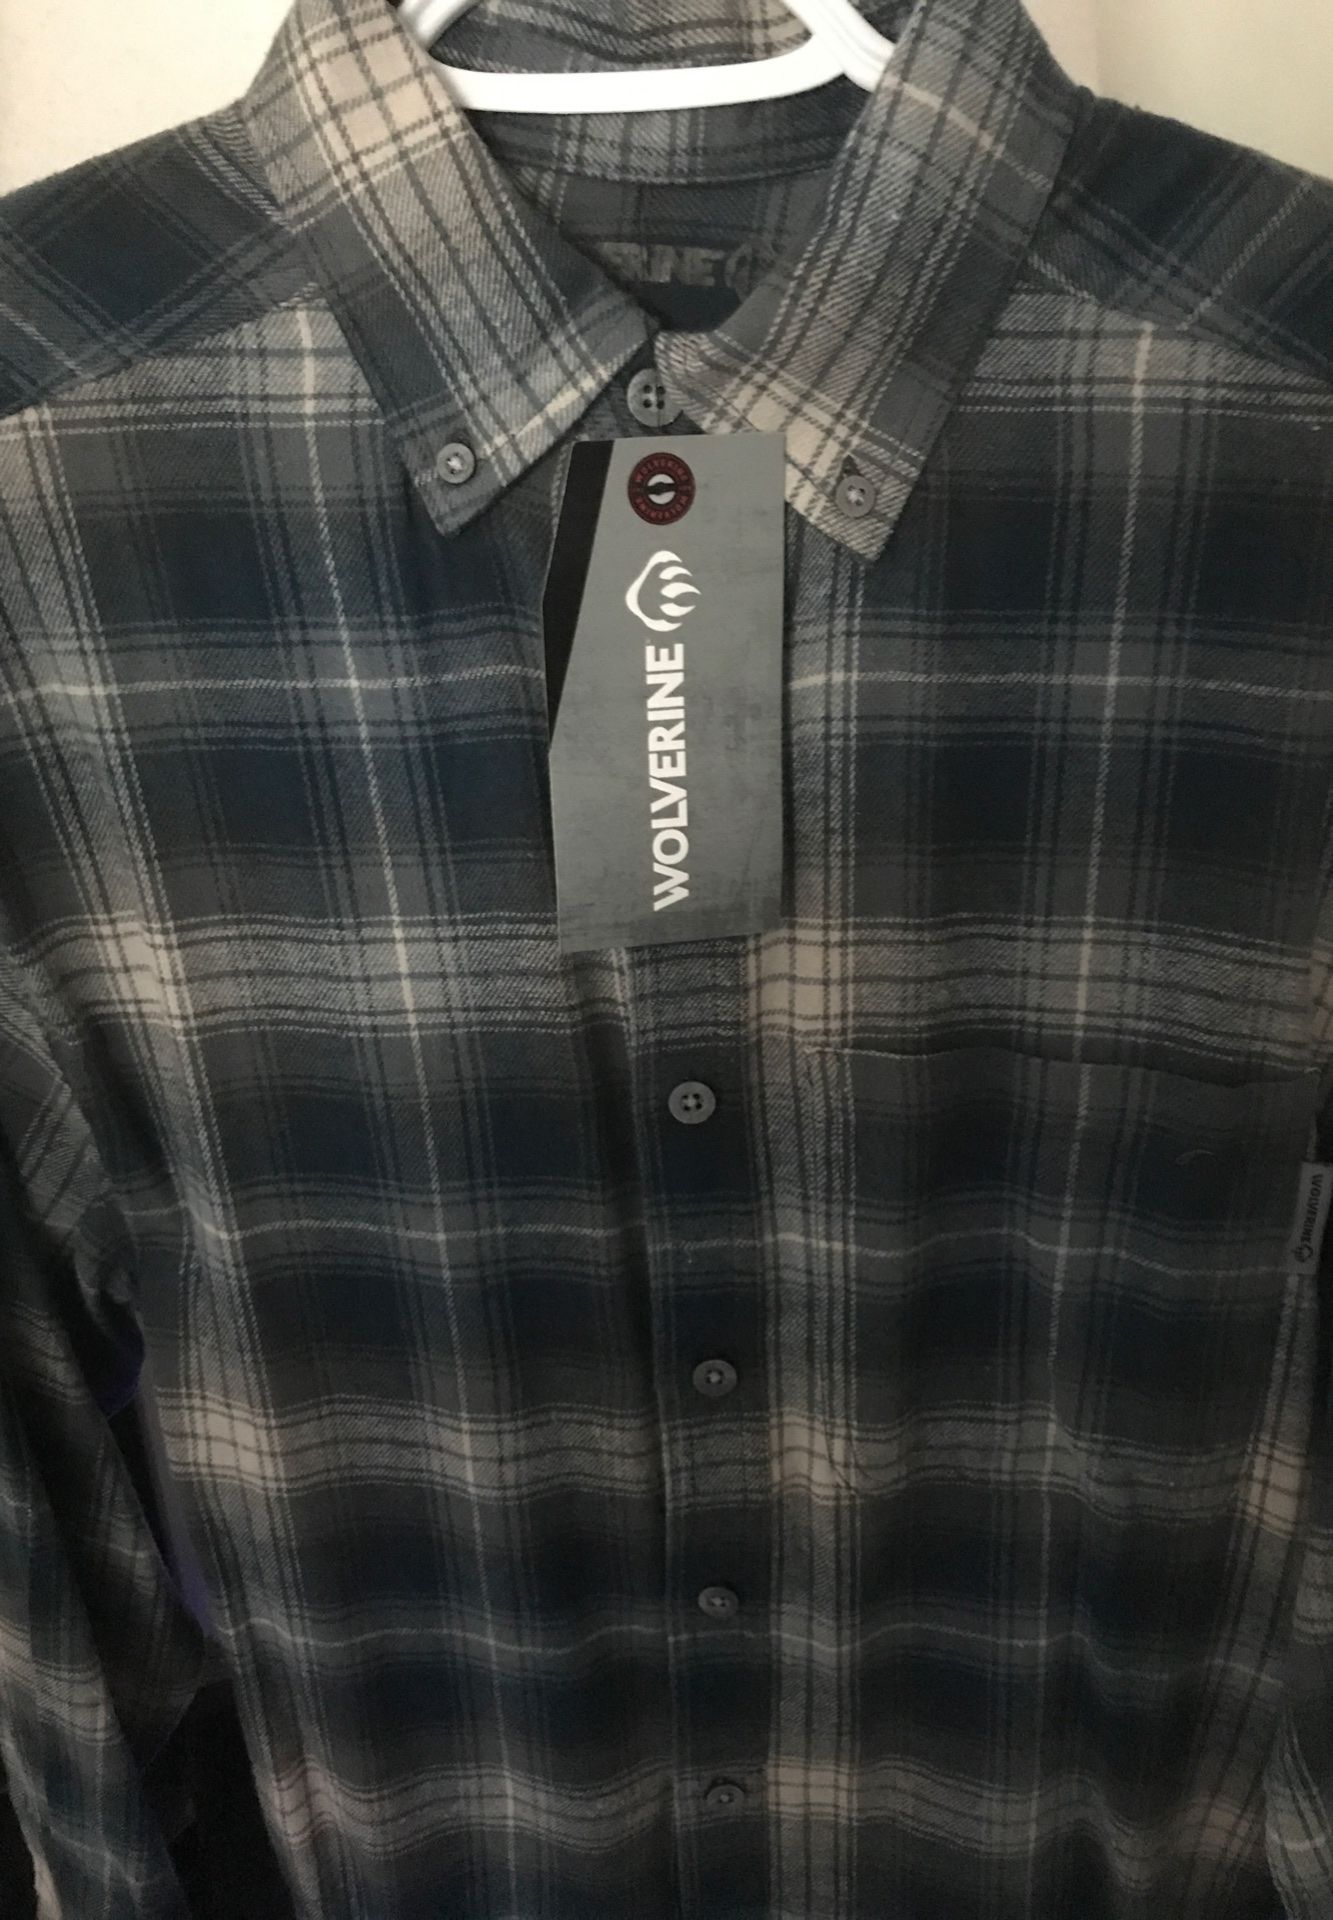 New Flannel shirt size small $10